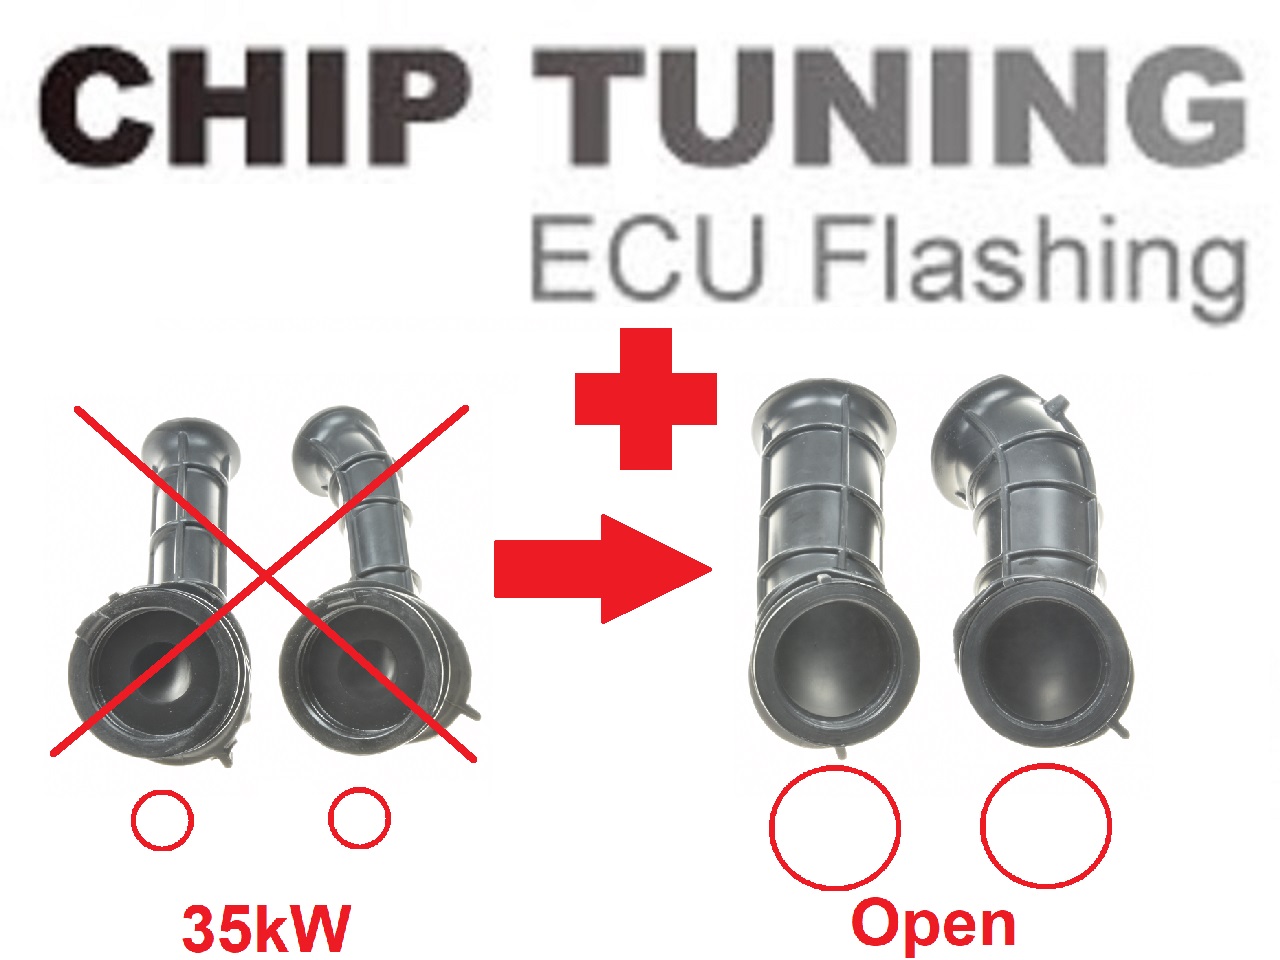 High Performance ECU Flash Tuning (Stage 2) + open air funnels